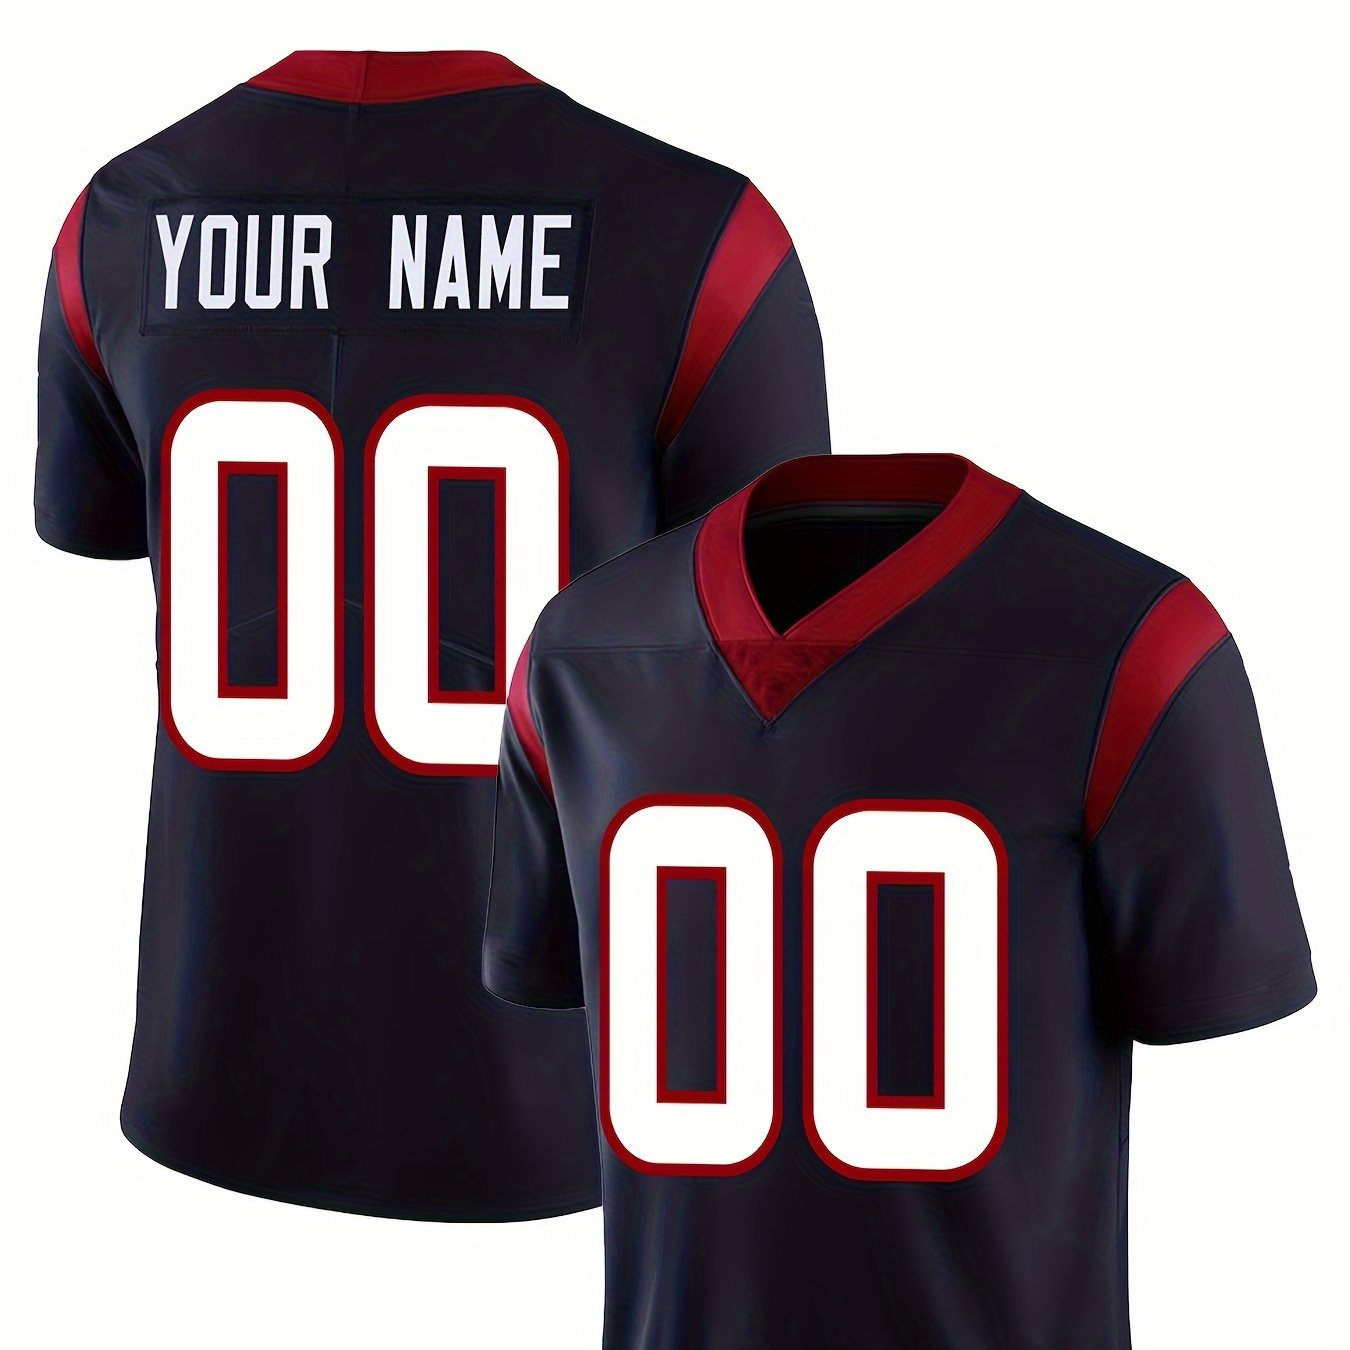 

Customized Name And Number Design, Men's Short Sleeve Loose V-neck Embroidery American Football Jersey, Retro Color Block Rugby Jersey, Summer Parties